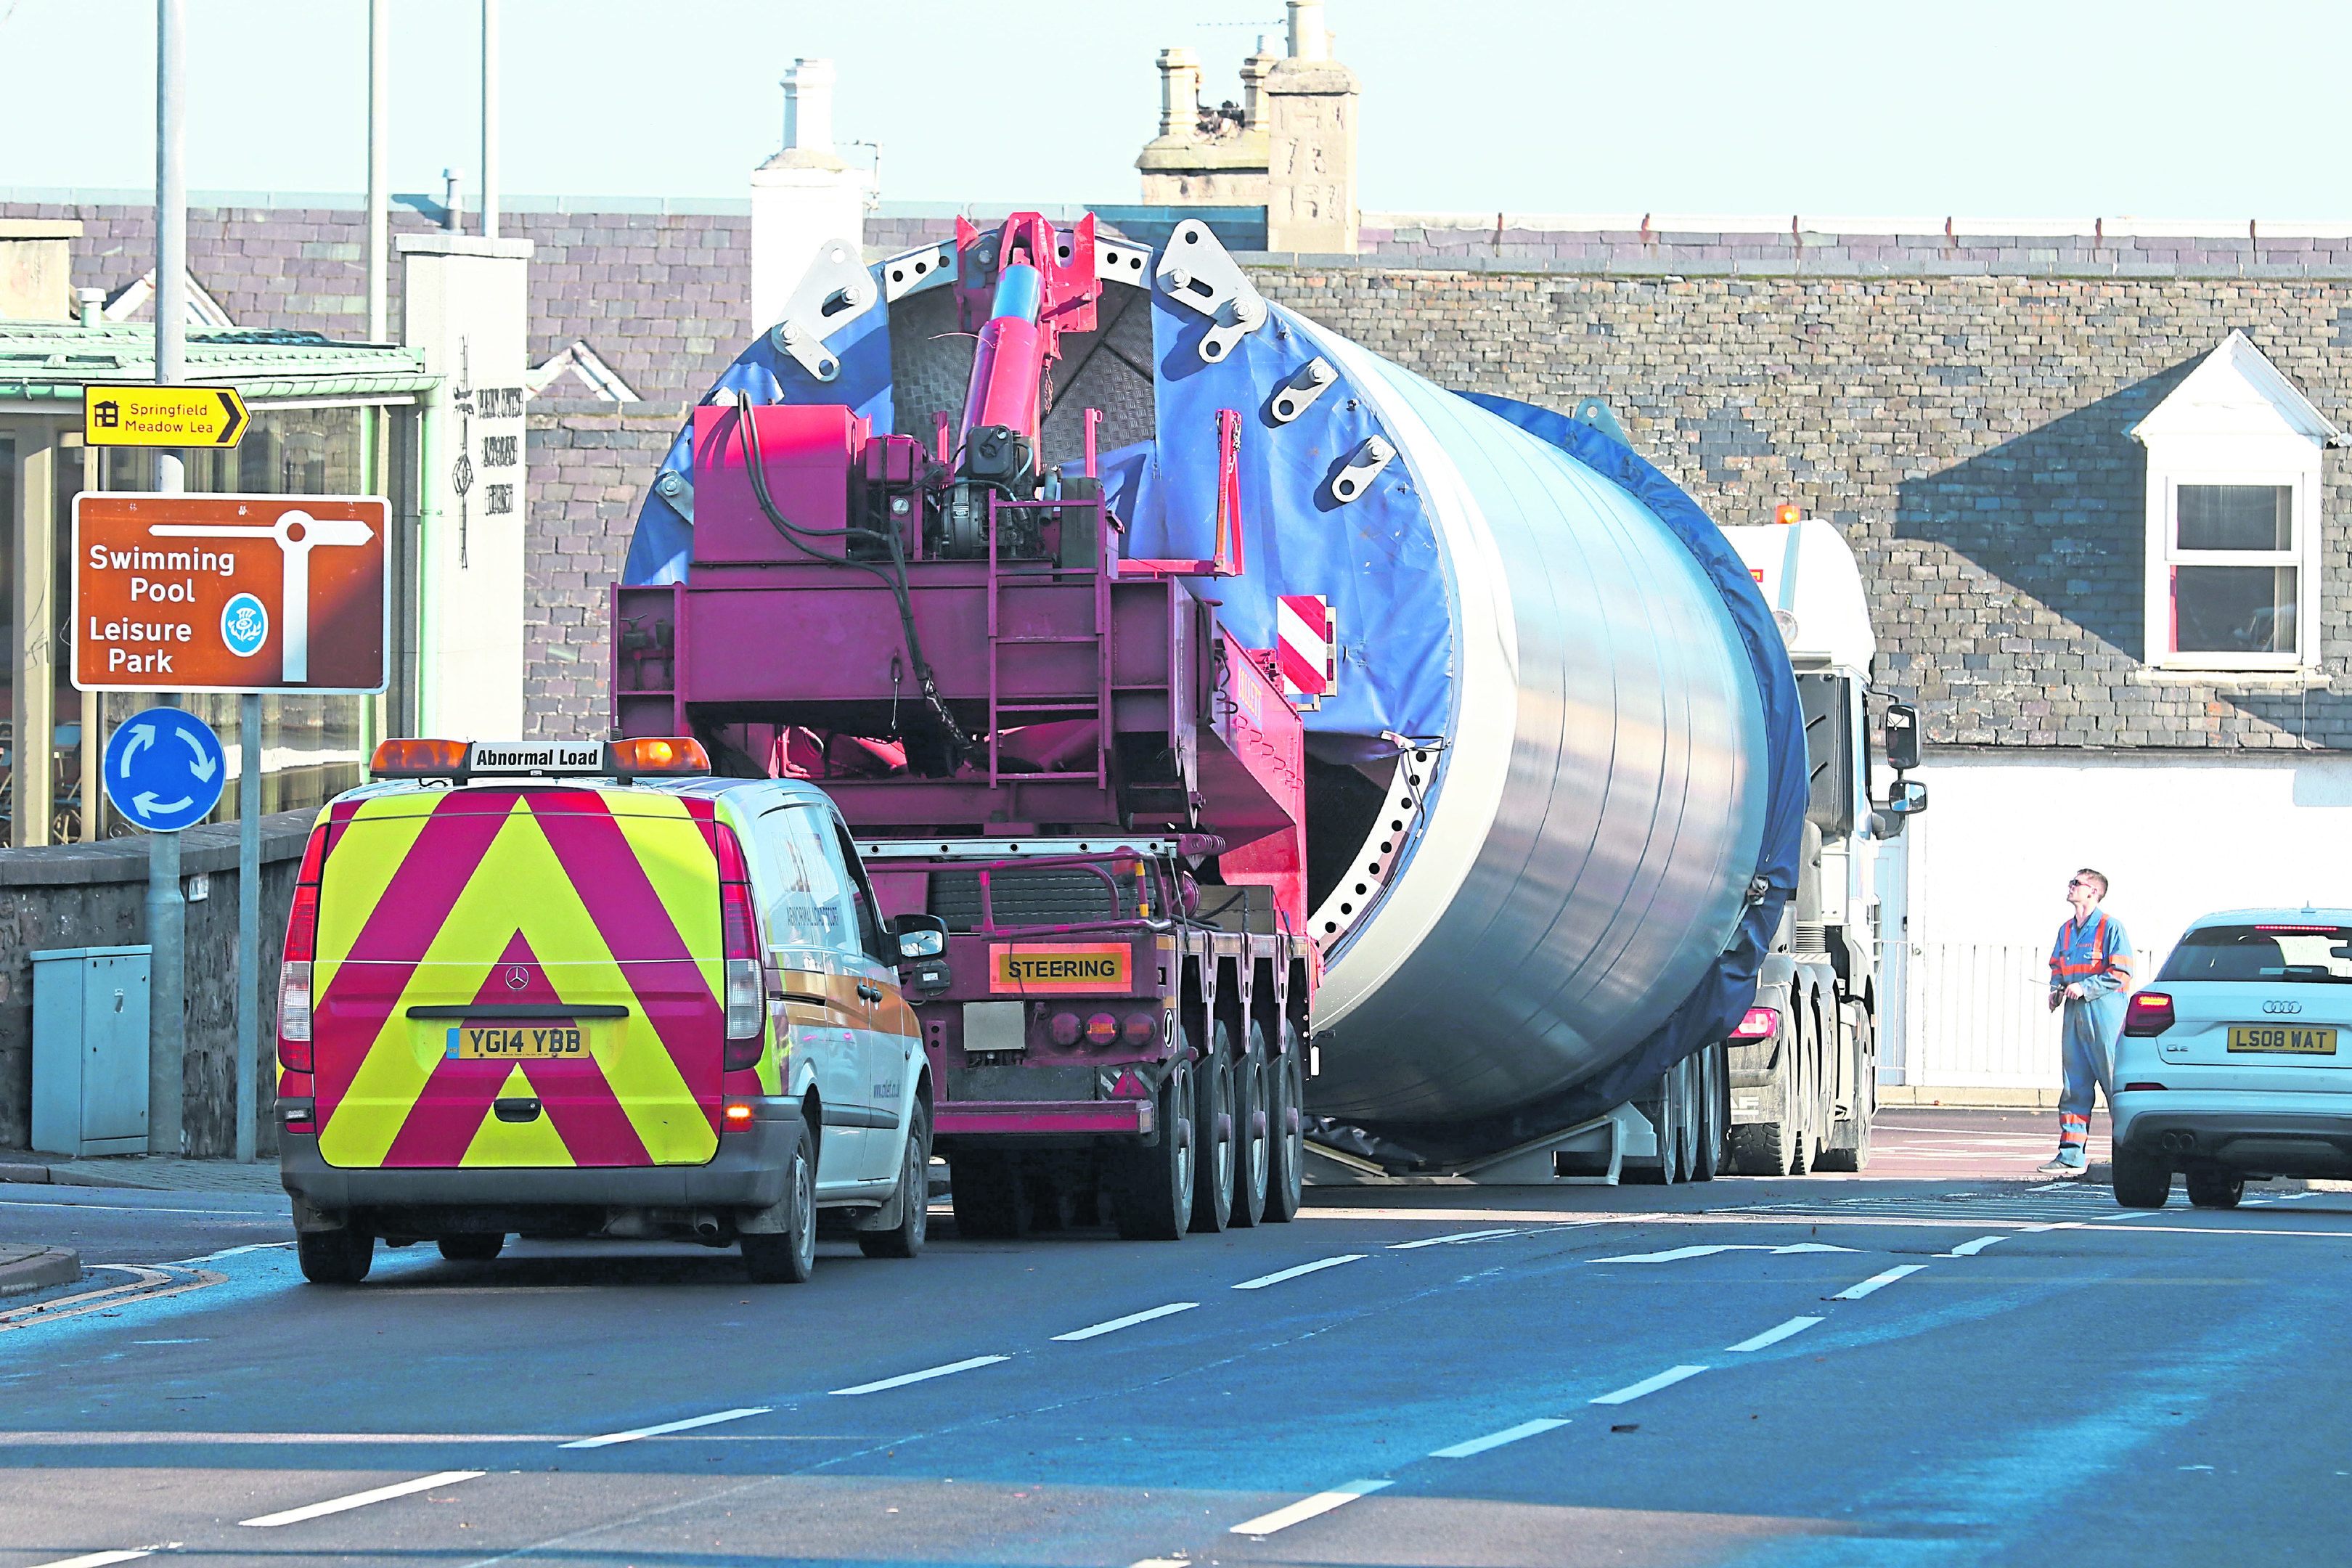 10 October 2018: A wind turbine transporter broke down on the A96 at the roundabout in Nairn, causing some traffic disruption. Note that the tractor unit shown in the photos is NOT the one that broke down. This is the replacement one. Picture: Andrew Smith